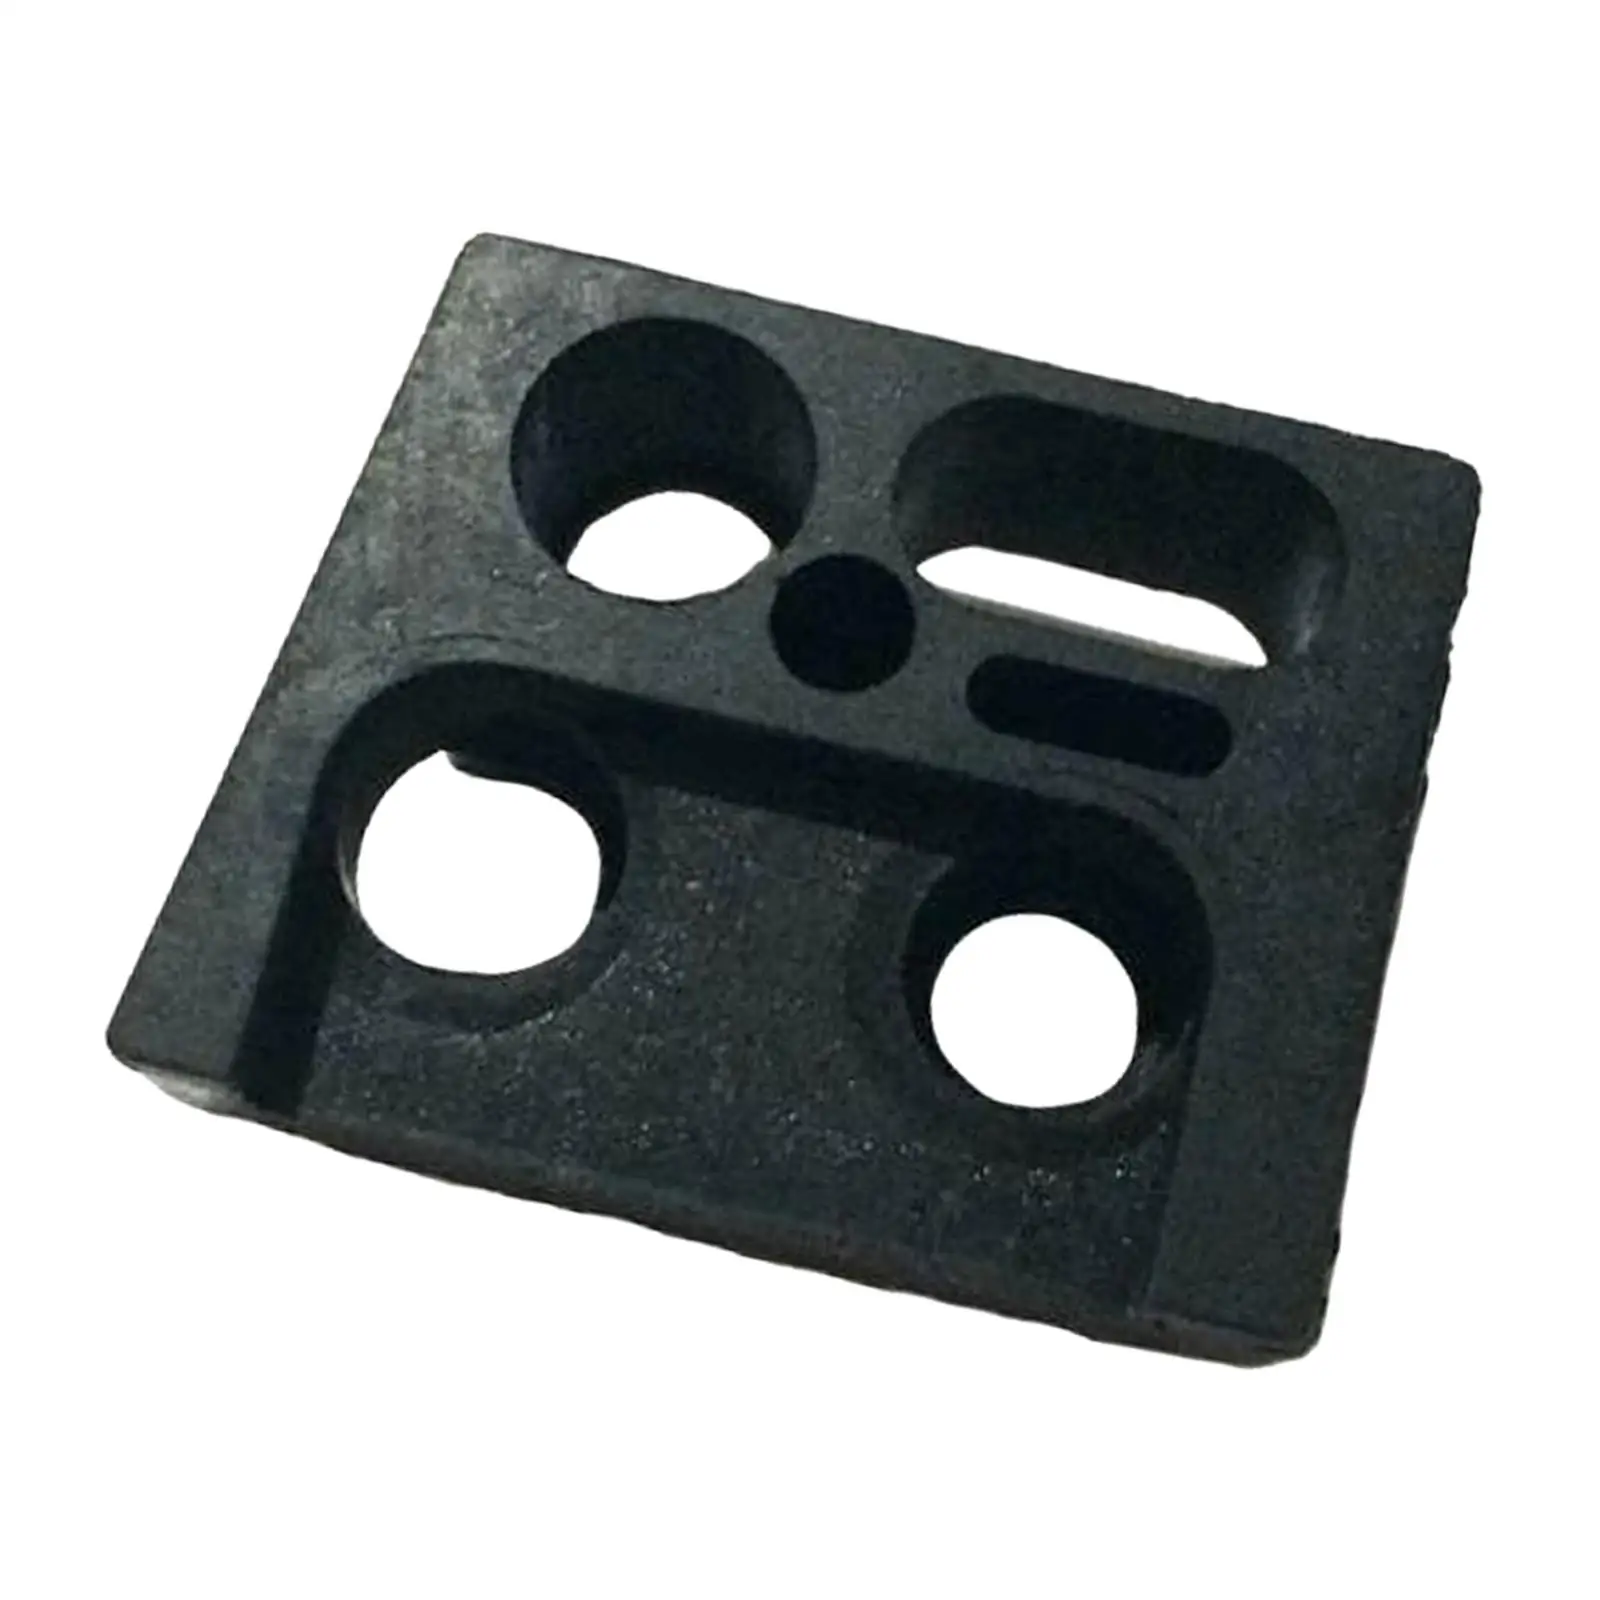 Rubber Grommet Assembly 39x49mm Repair Parts Direct Replaces Durable 66T-42725-30-00 Easy Installation Accessory for Parsun